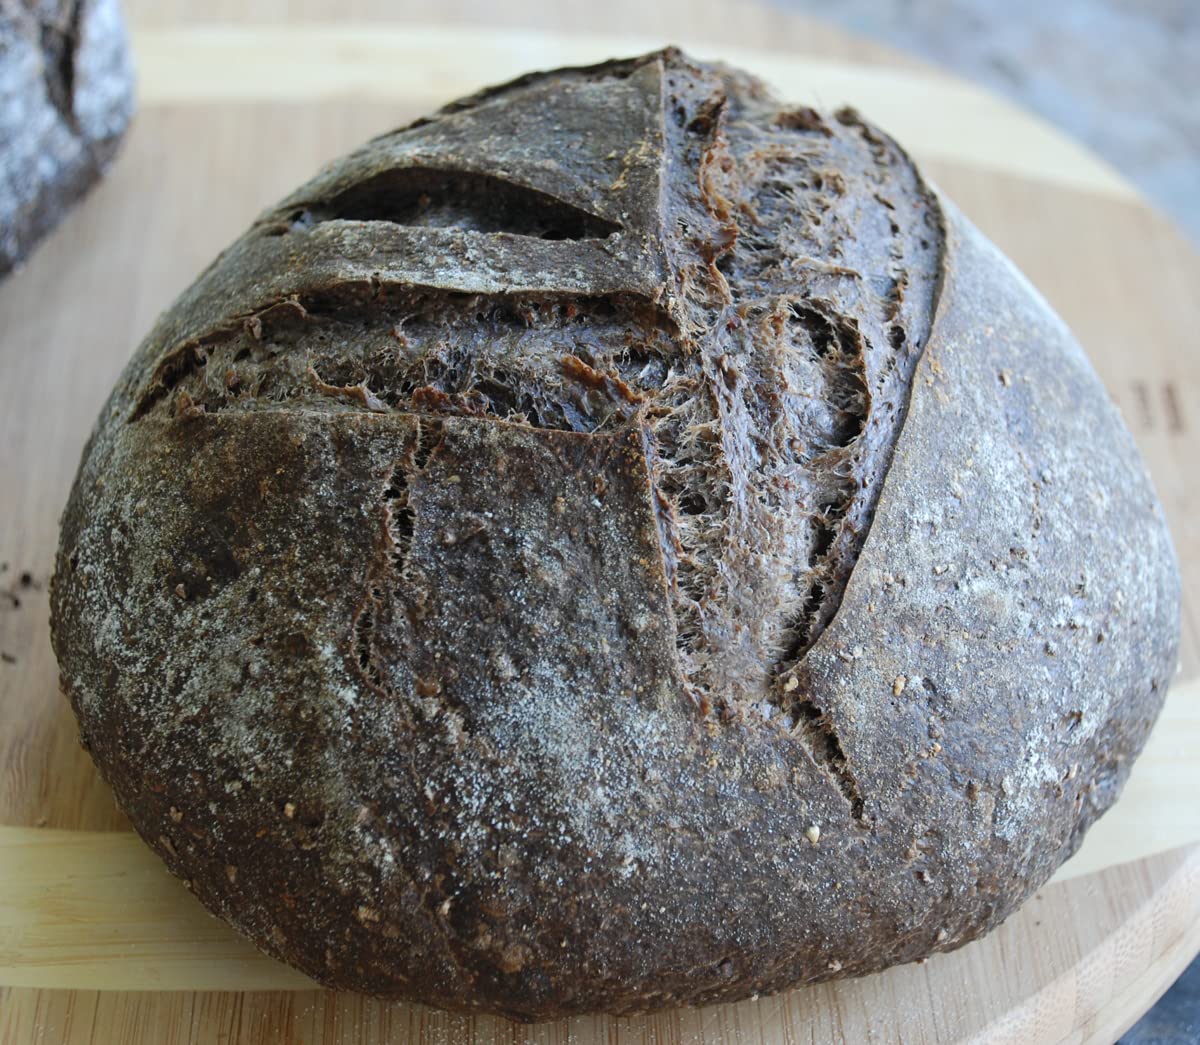 400 Year-Old History "BLACK DEATH" Sourdough Starter - ACTIVE FRESH SOUR Yeast Culture